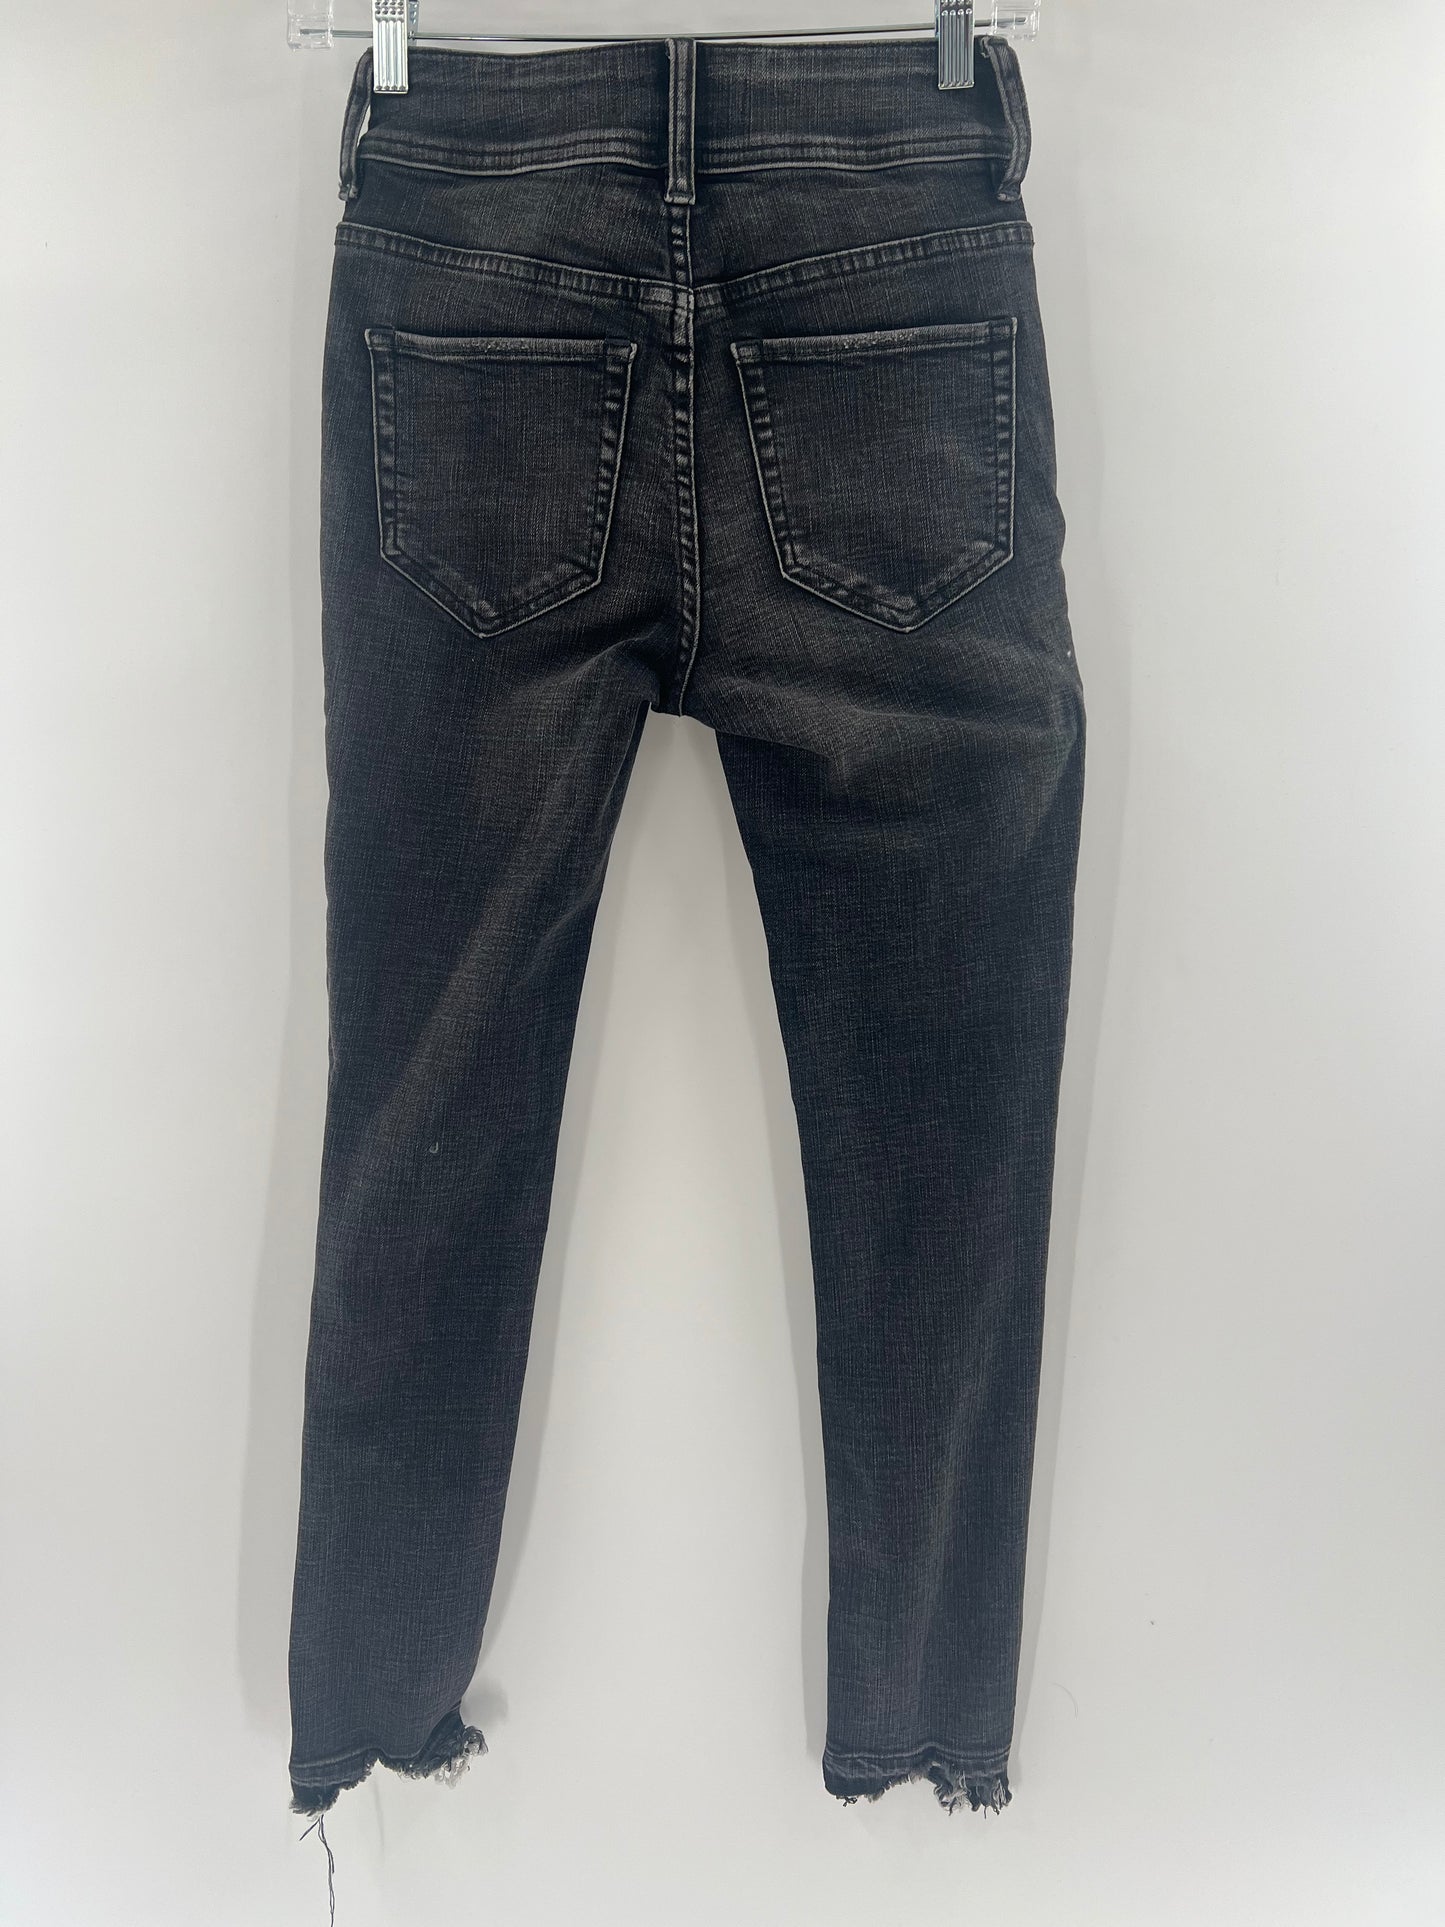 Free People Black Button Up Jeans (Size 25)